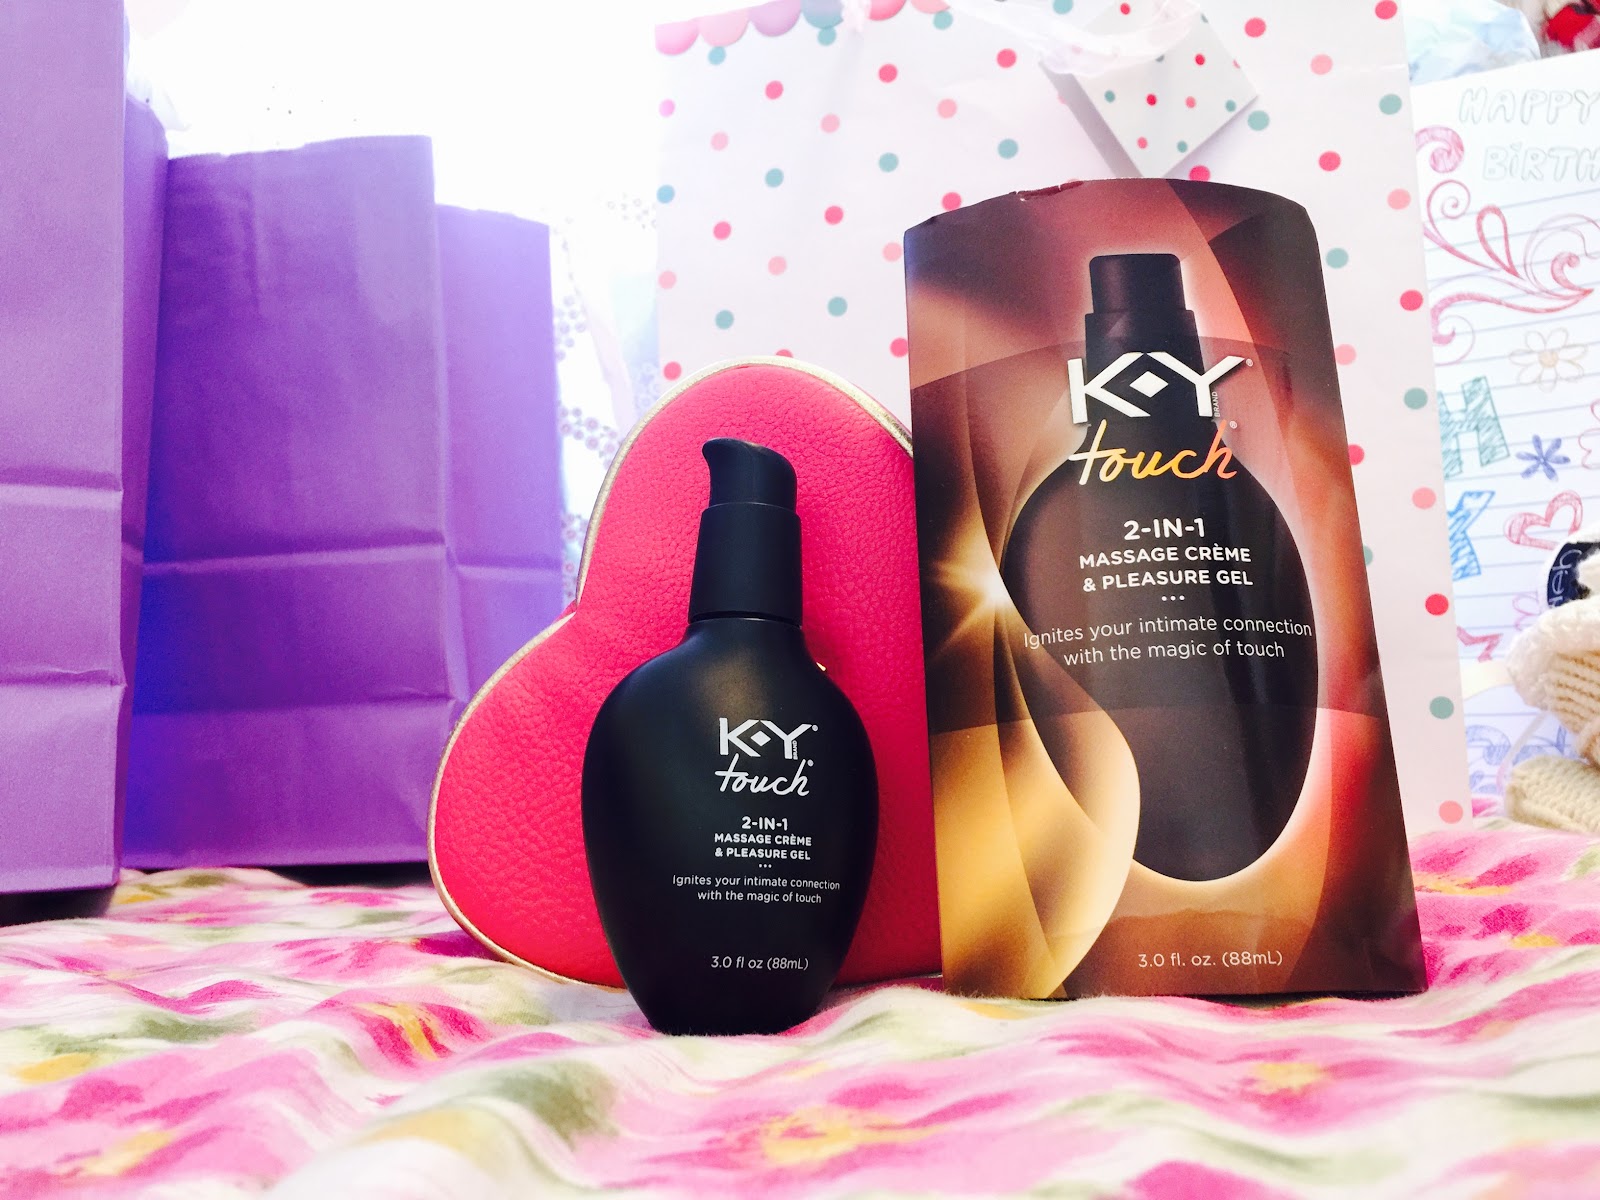 12 dates to do with your boyfriend, 12 dates to do with your girlfriend, girlfriend and boyfriend time, ky touch, ky touch massage creme and pleasure gel, pleasure gel, sex time, sexy time, yummy, 